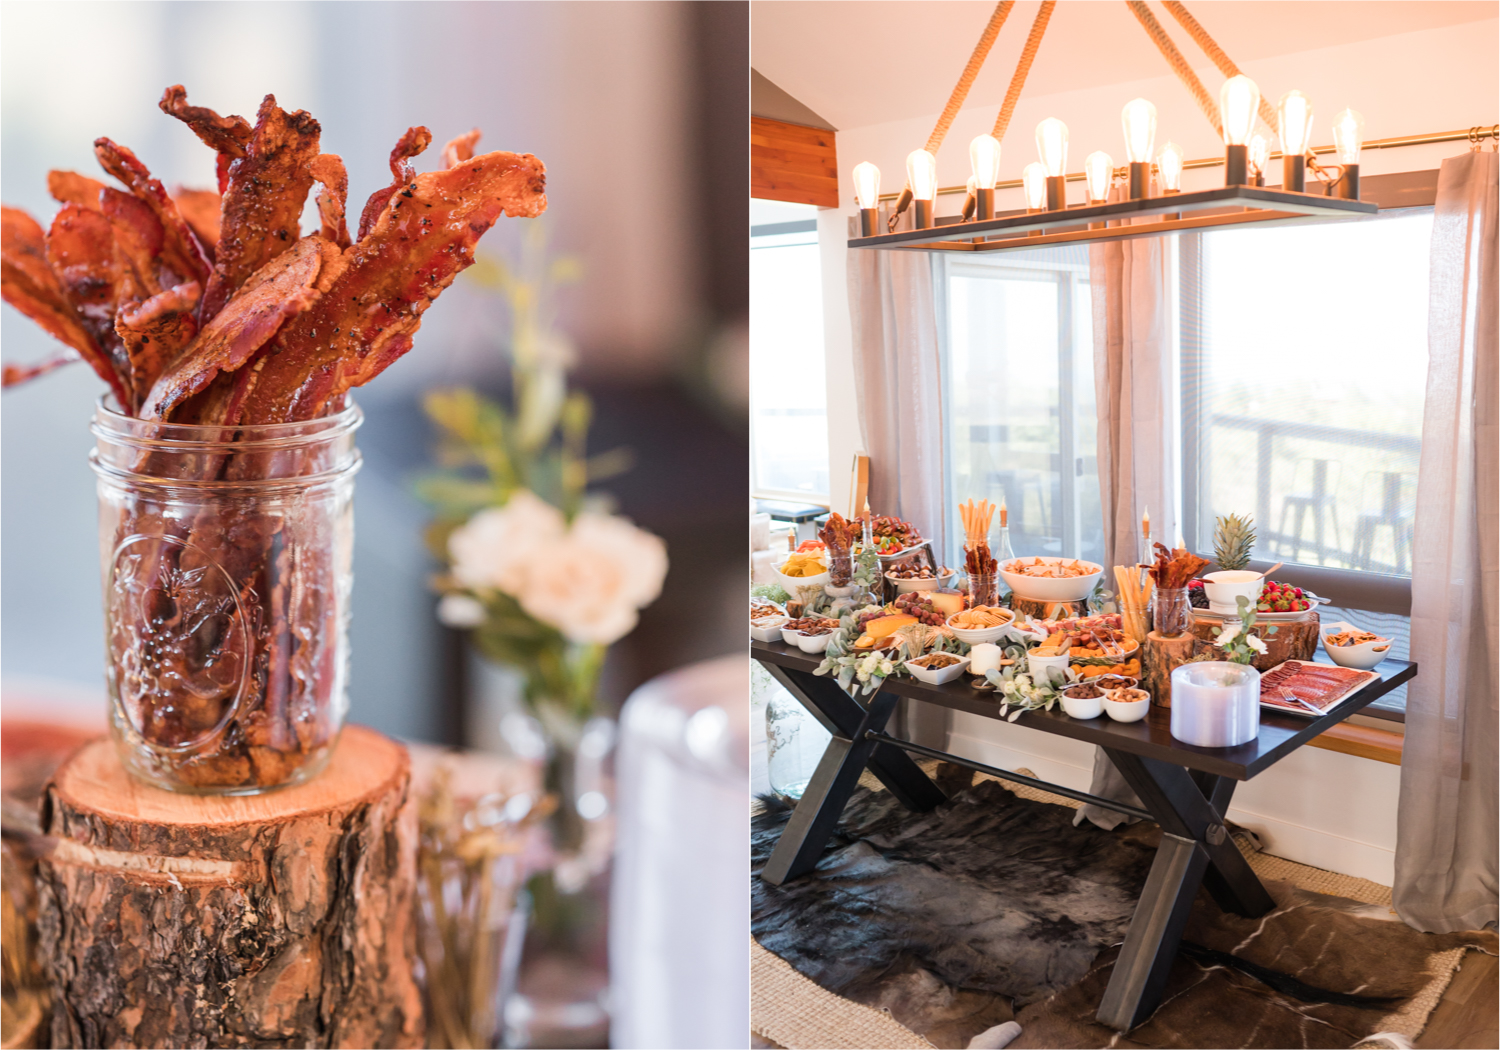 Autumn mountain wedding in Florence Colorado | Britni Girard Photography | Colorado Wedding Photo and Video Team | Mountainside Cabin for intimate wedding with rustic farm-tables and romantic details | Large Charcuterie Table for Cocktail Hour with Bacon